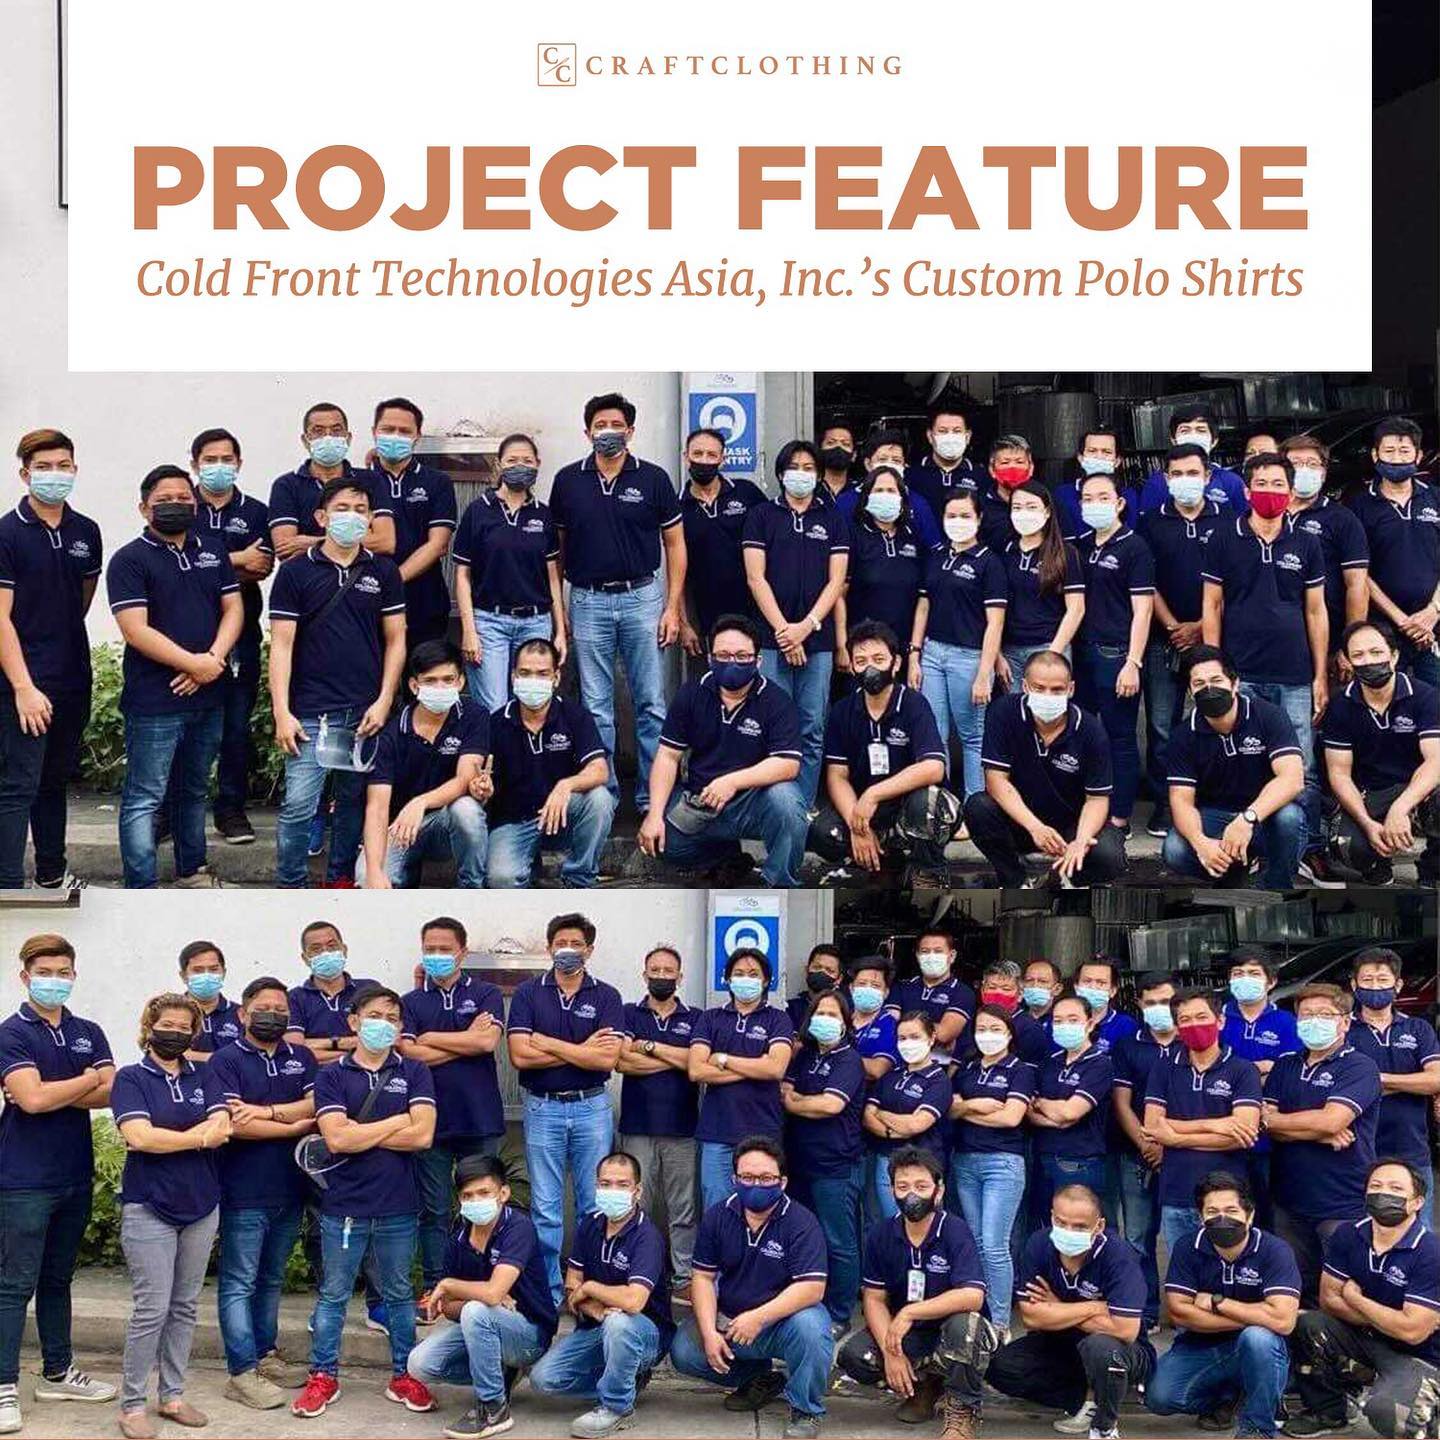 Project Feature: Cold Front Technologies Asia, Inc.’s Polo Shirts